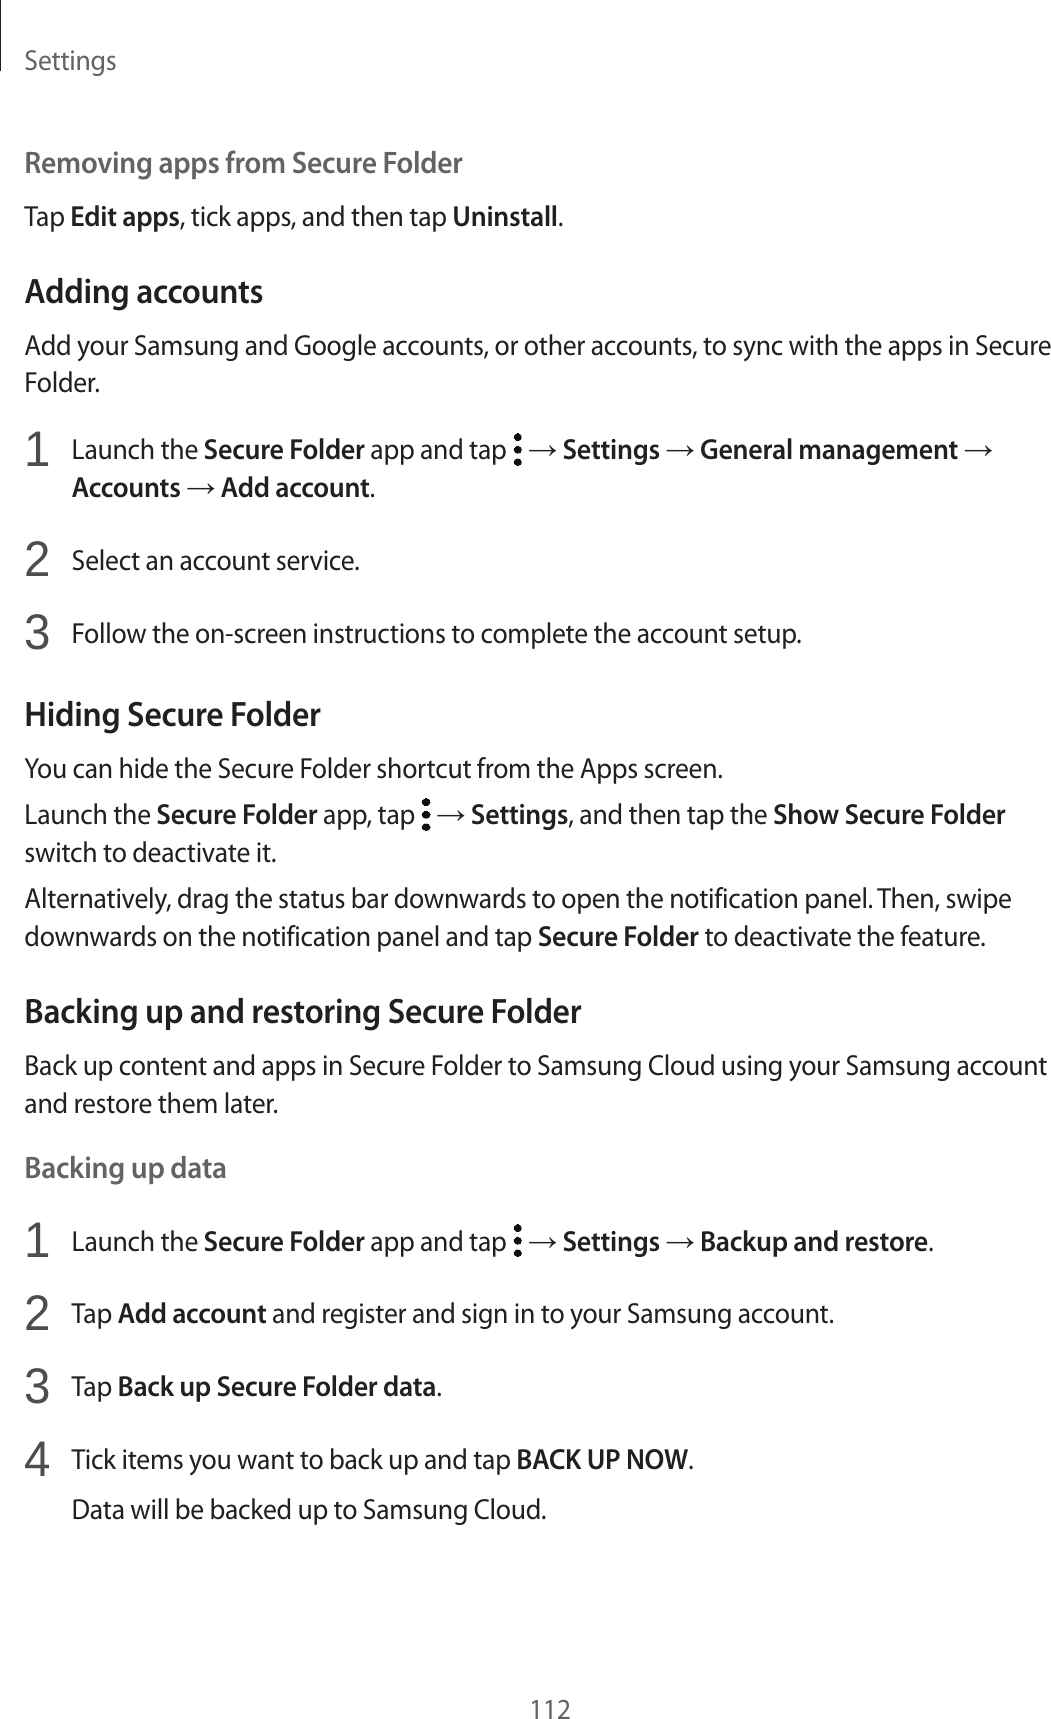 Settings112Removing apps from Secure FolderTap Edit apps, tick apps, and then tap Uninstall.Adding accountsAdd your Samsung and Google accounts, or other accounts, to sync with the apps in Secure Folder.1  Launch the Secure Folder app and tap   → Settings → General management → Accounts → Add account.2  Select an account service.3  Follow the on-screen instructions to complete the account setup.Hiding Secure FolderYou can hide the Secure Folder shortcut from the Apps screen.Launch the Secure Folder app, tap   → Settings, and then tap the Show Secure Folder switch to deactivate it.Alternatively, drag the status bar downwards to open the notification panel. Then, swipe downwards on the notification panel and tap Secure Folder to deactivate the feature.Backing up and restoring Secure FolderBack up content and apps in Secure Folder to Samsung Cloud using your Samsung account and restore them later.Backing up data1  Launch the Secure Folder app and tap   → Settings → Backup and restore.2  Tap Add account and register and sign in to your Samsung account.3  Tap Back up Secure Folder data.4  Tick items you want to back up and tap BACK UP NOW.Data will be backed up to Samsung Cloud.